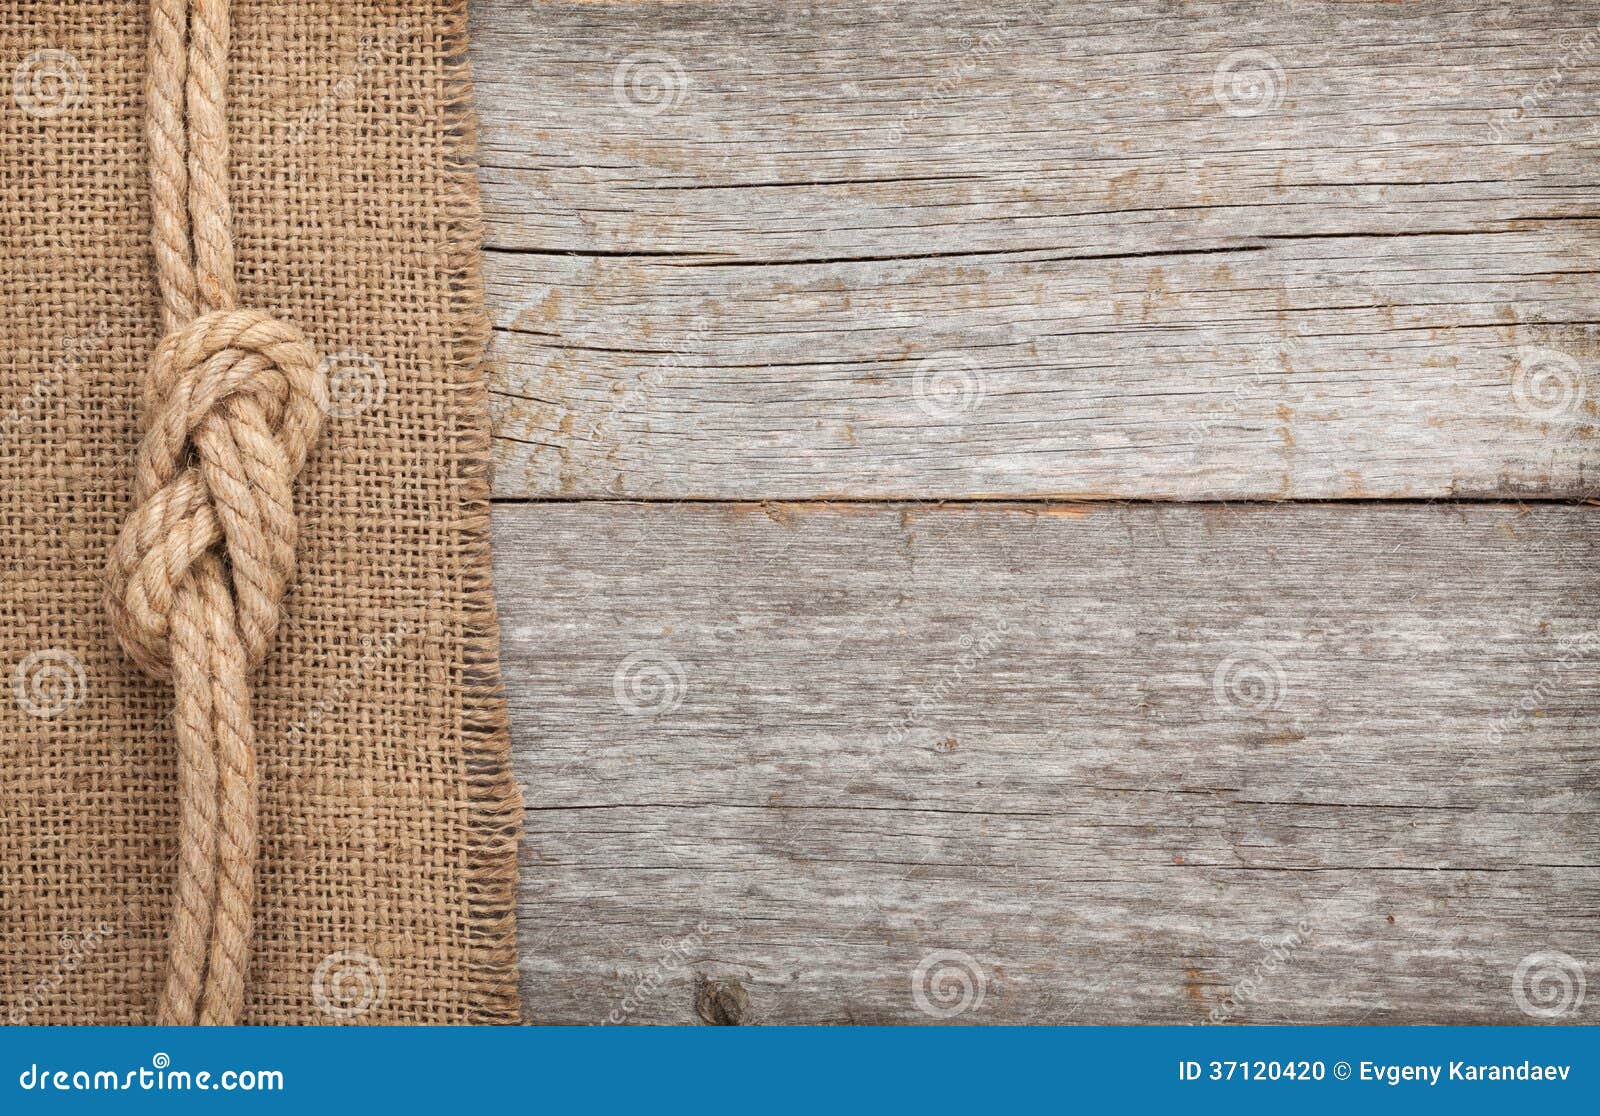 ship rope on wood and burlap texture background stock